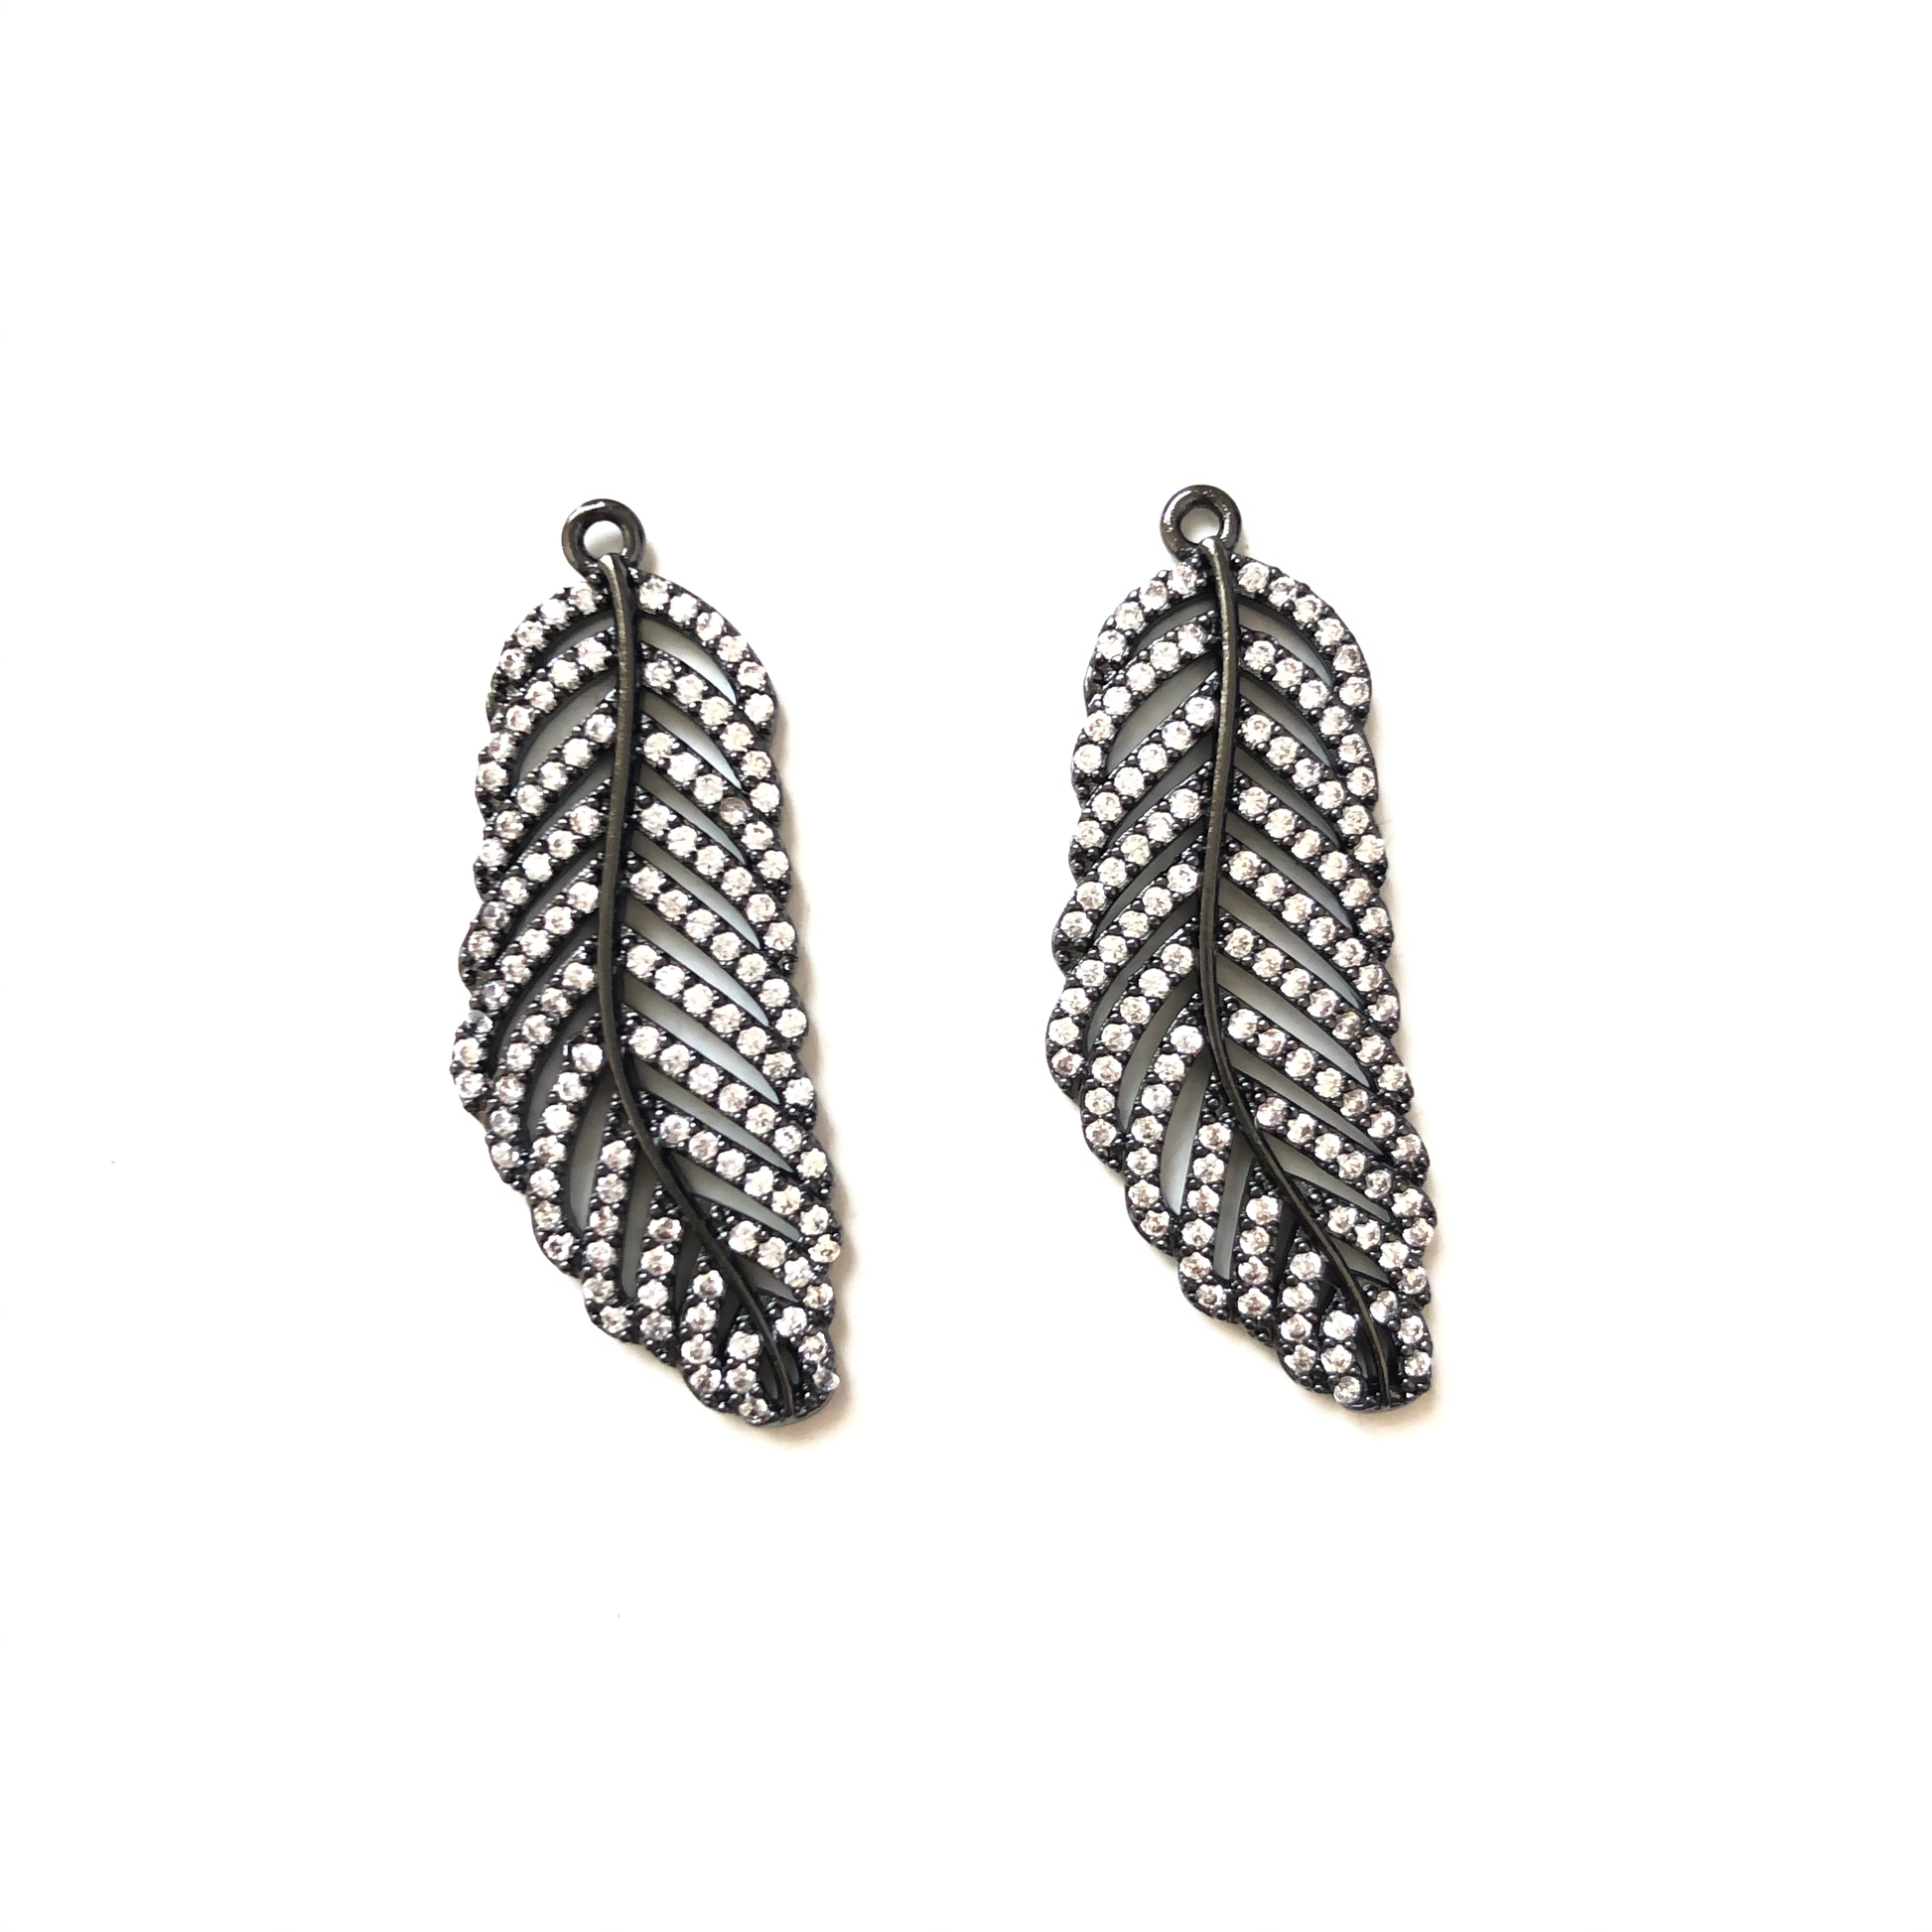 10pcs/lot 30.5*13mm CZ Paved Feather Charms Black CZ Paved Charms Feathers On Sale Charms Beads Beyond